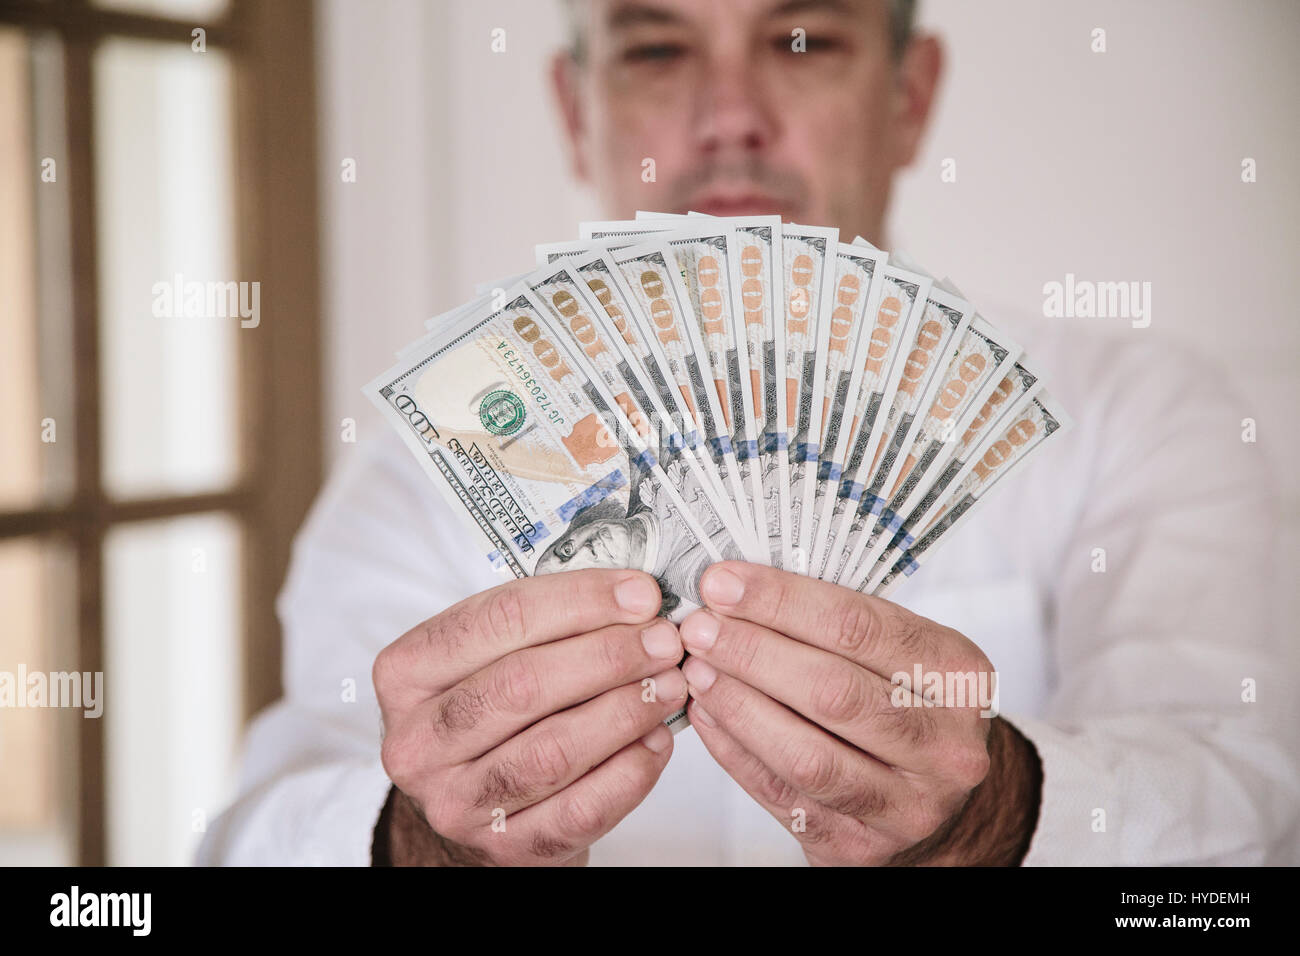 A man fans out two hands full of new one hundred dollar bills in US currency Stock Photo